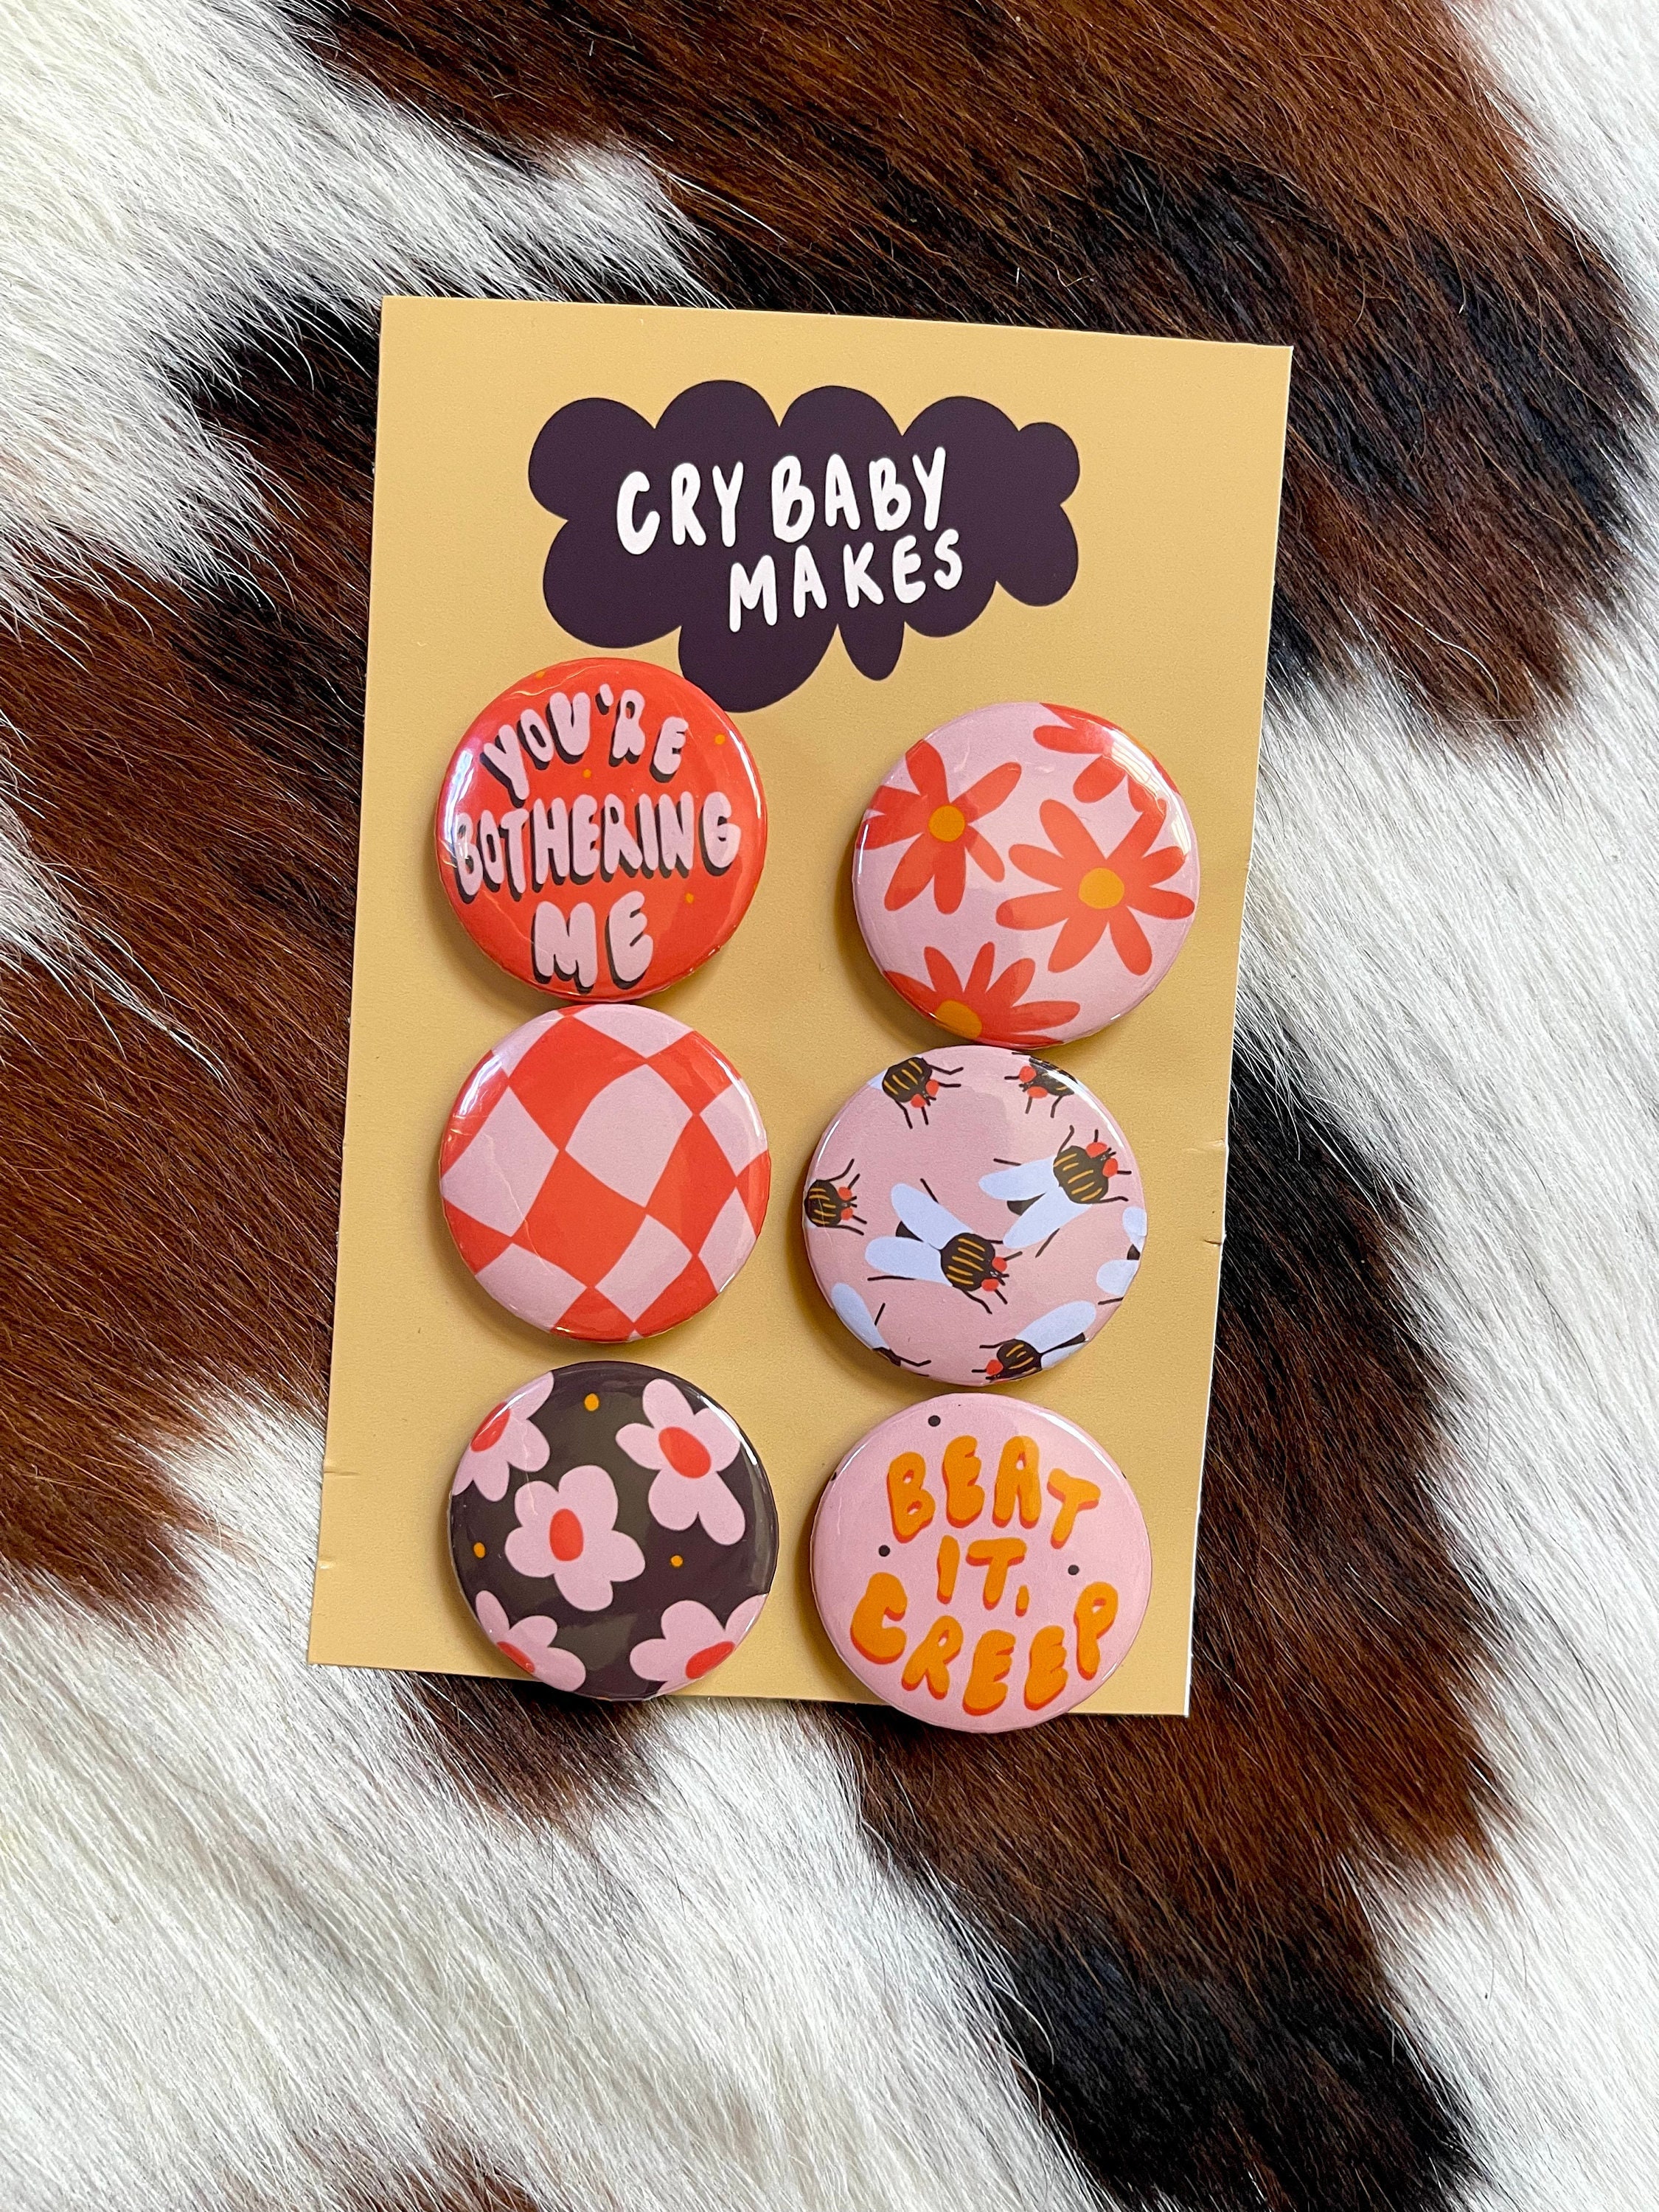 1.25 Metal Pin Button Pack / Trendy Pastel Pins / Patterned Buttons / Checkered / Floral / Fly / Funny Phrases / Cute Pins for Vest / Y2K